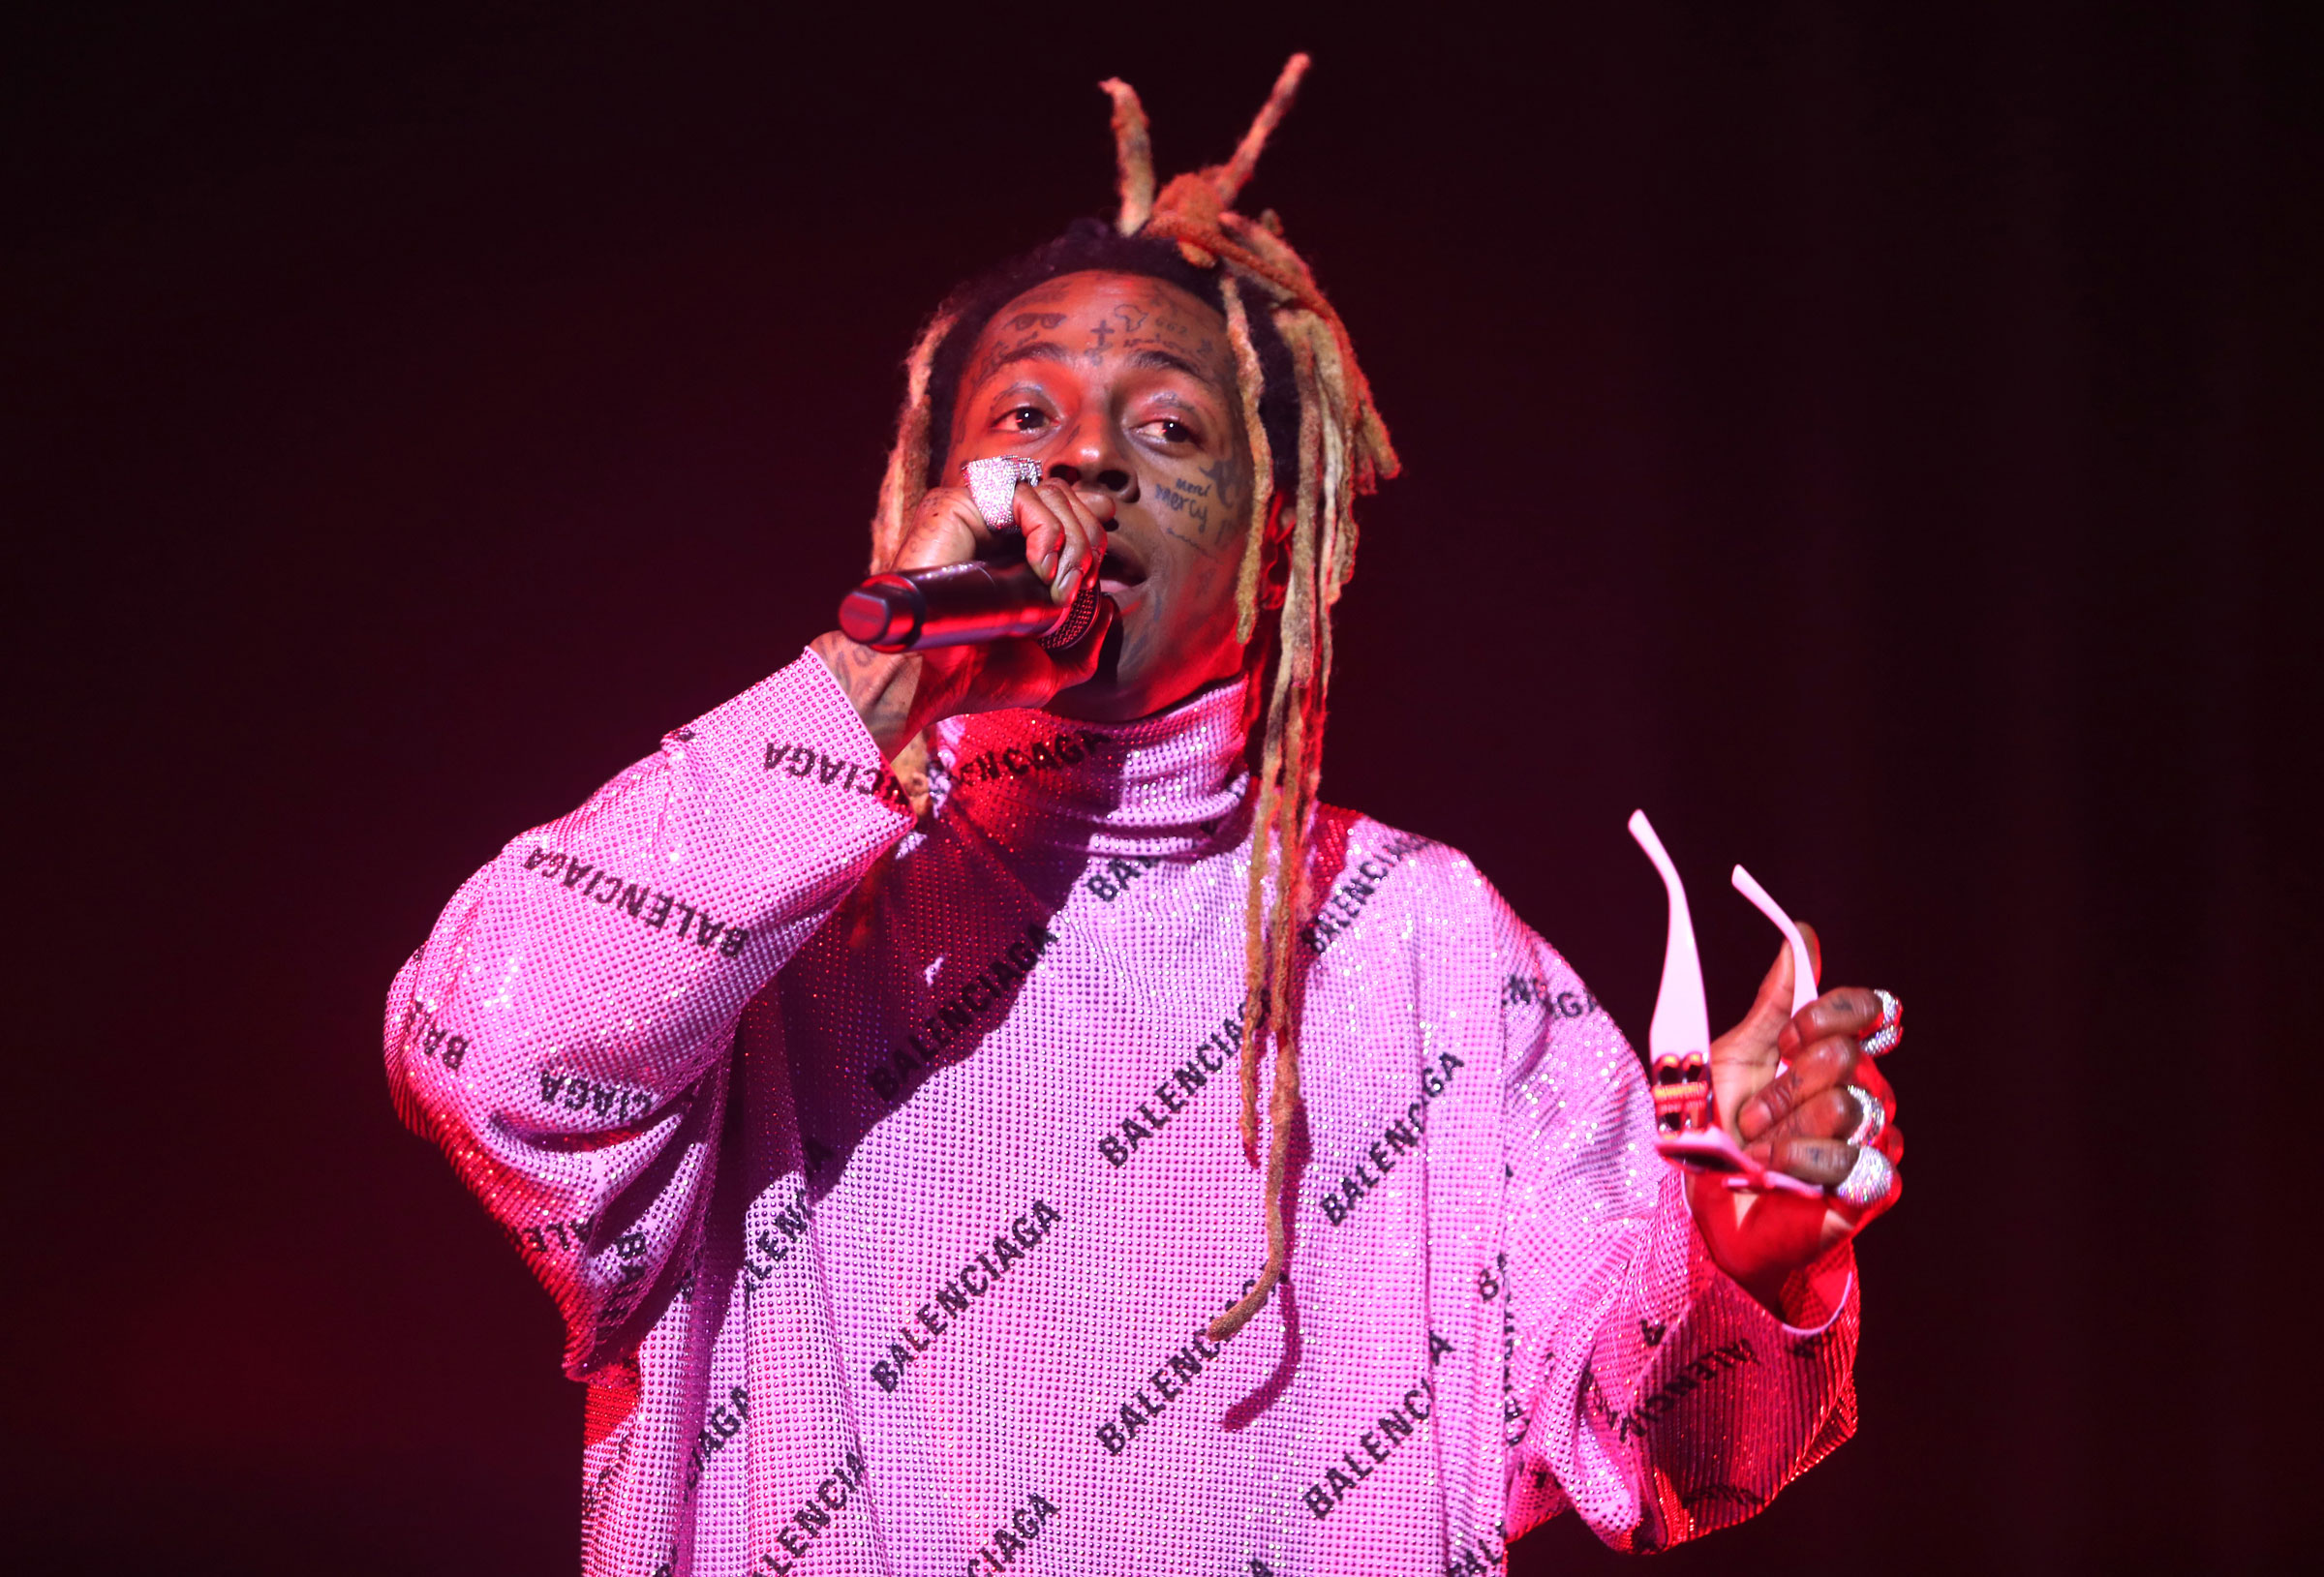 Lil Wayne performs at the Amazon Music Live Concert Series in Los Angeles on Nov. 17, 2022.